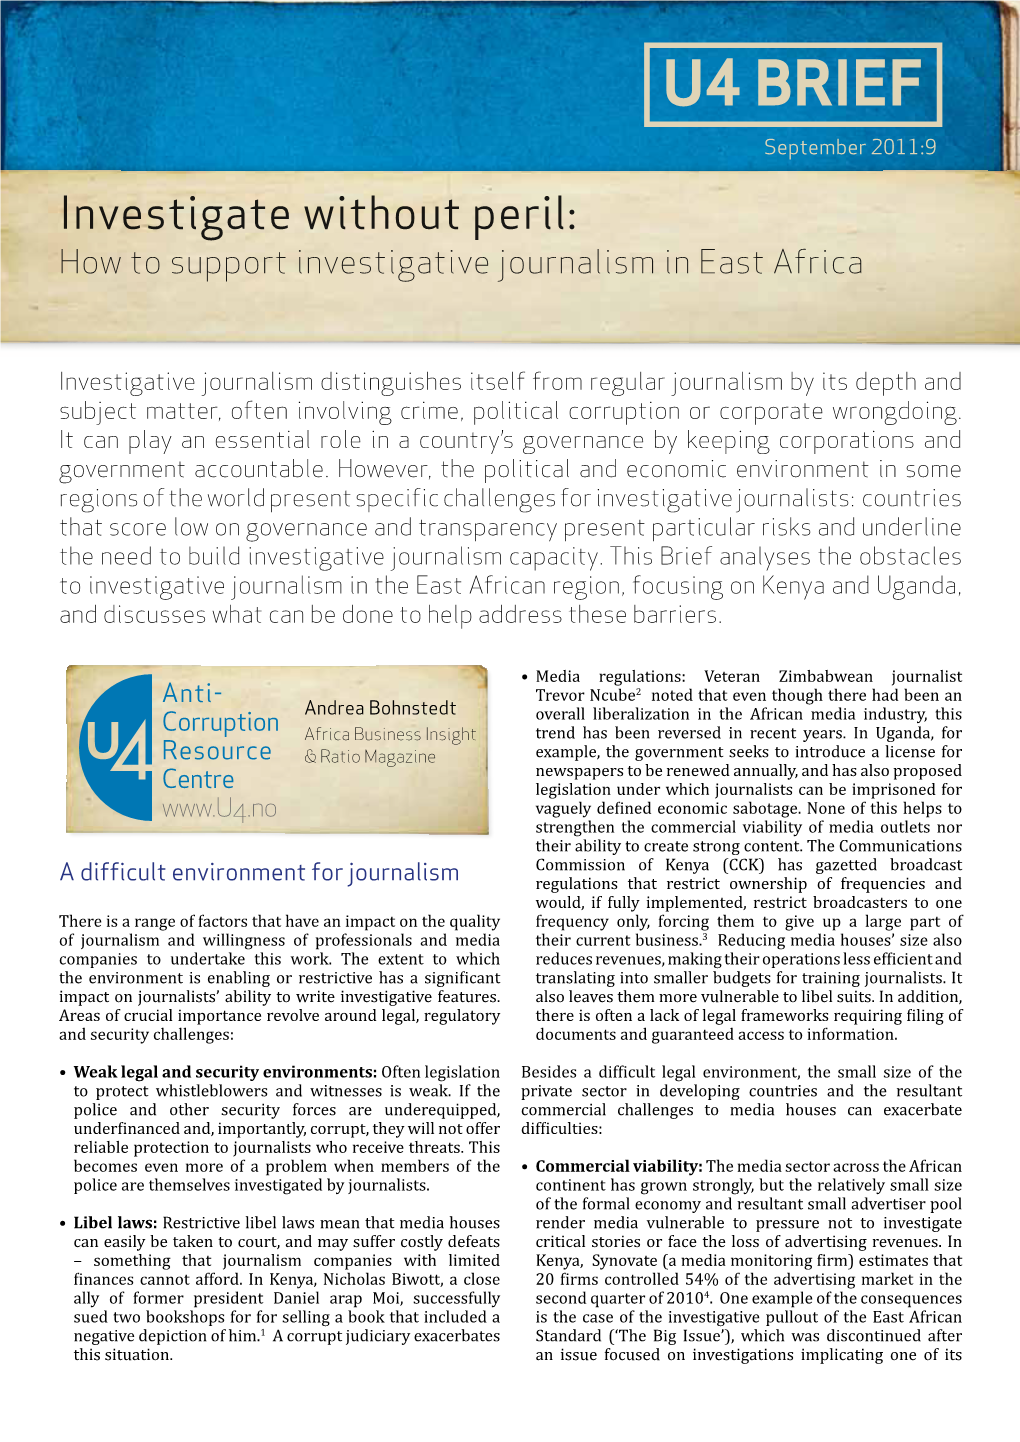 U4 BRIEF September 2011:9 Investigate Without Peril: How to Support Investigative Journalism in East Africa